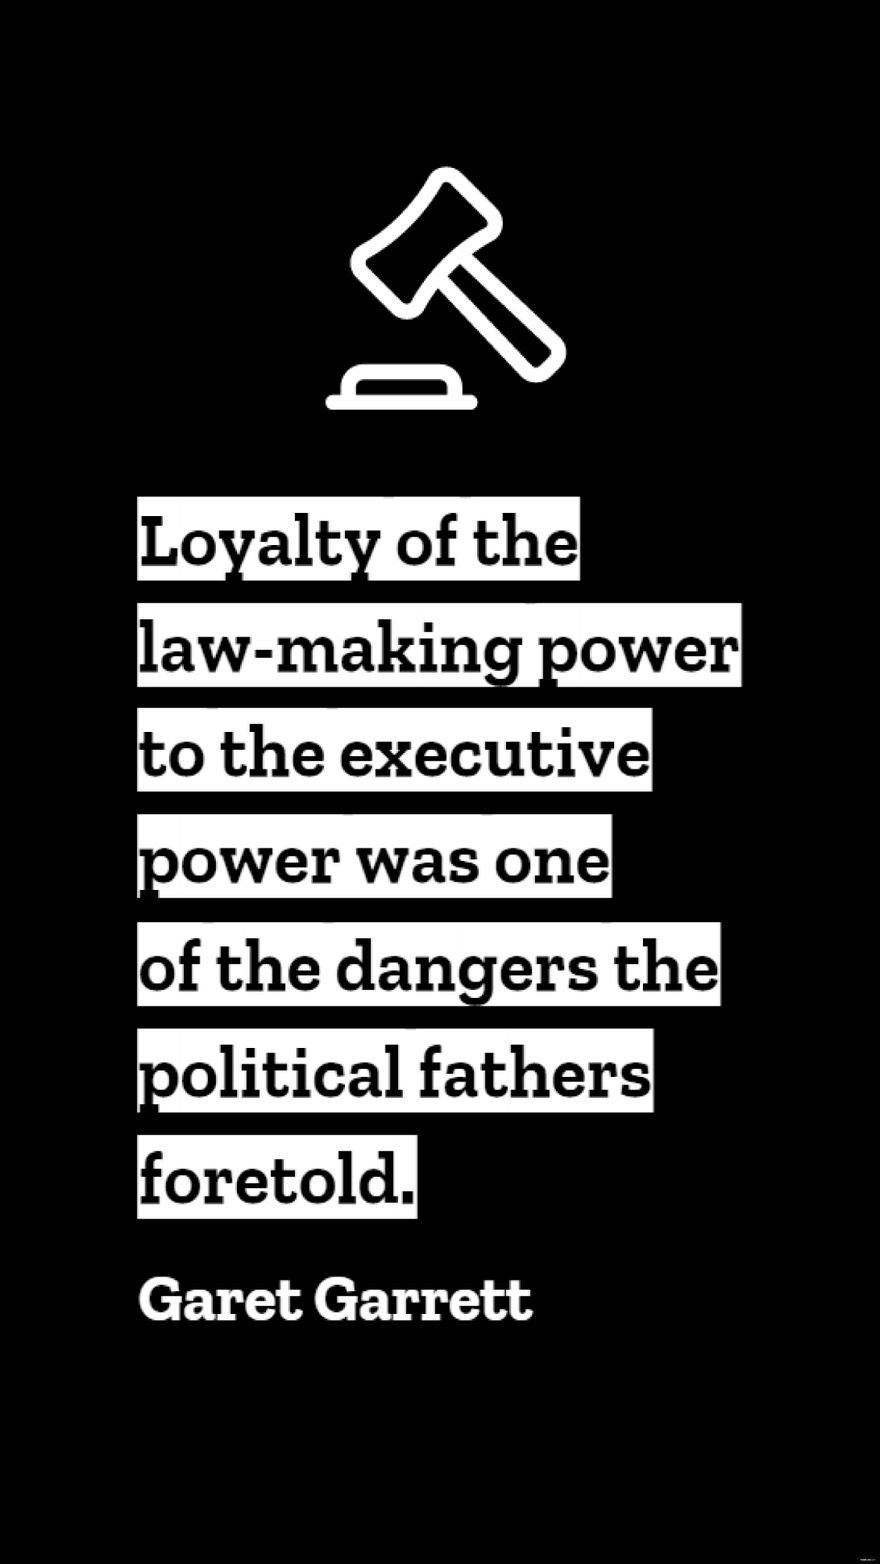 Free Garet Garrett - Loyalty of the law-making power to the executive power was one of the dangers the political fathers foretold.